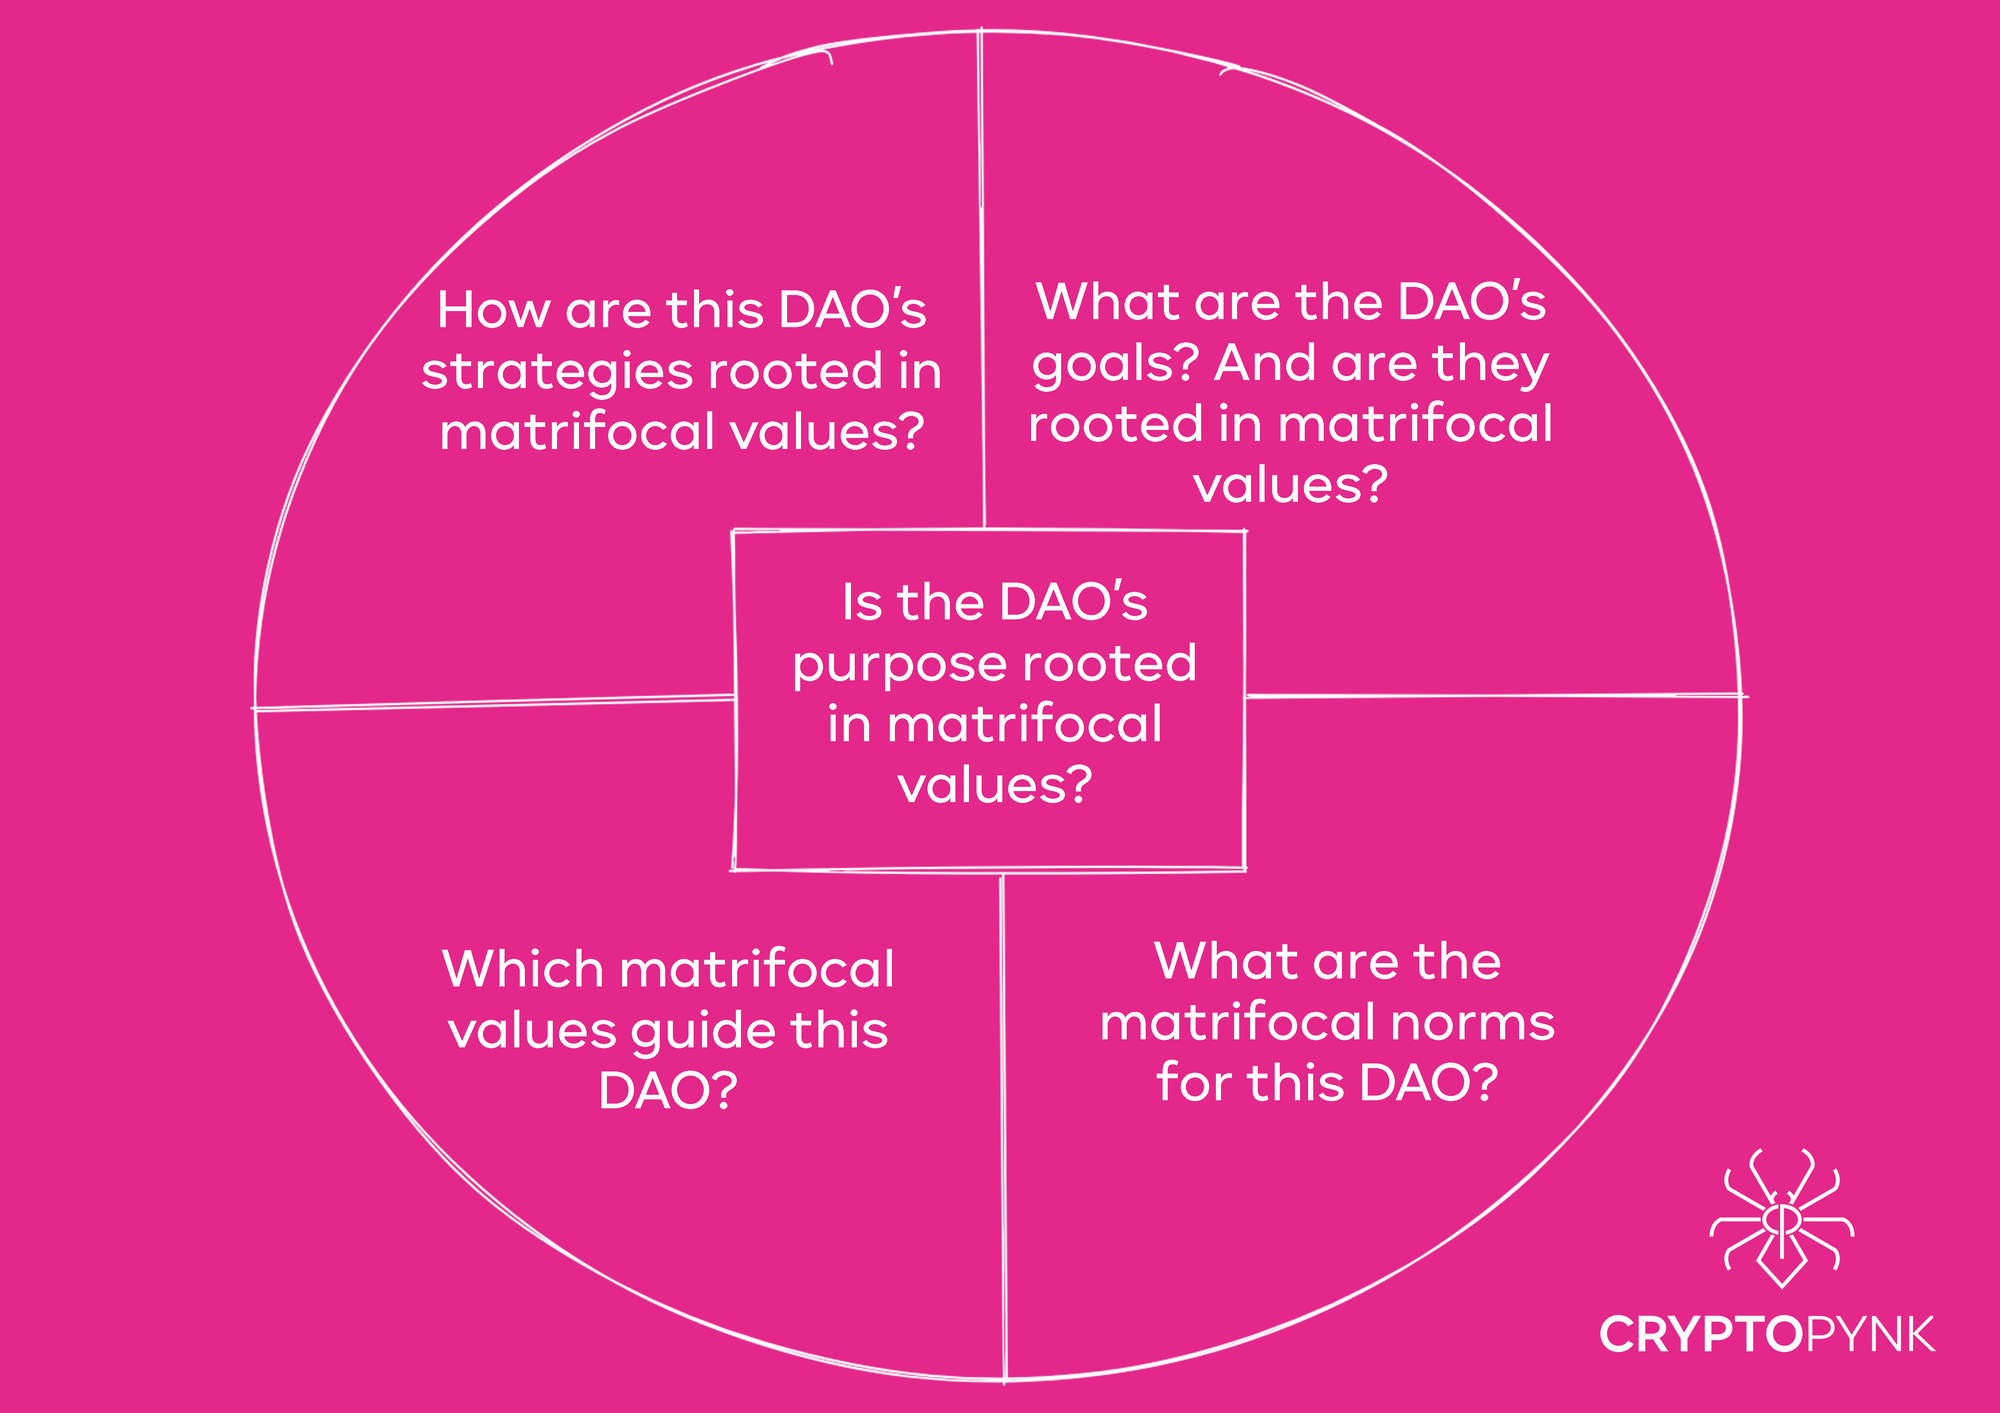 Pink background with white pie chart with 5 parts. Central part asks about purpose. Other 4 parts ask about values, norms, goals, strategy.